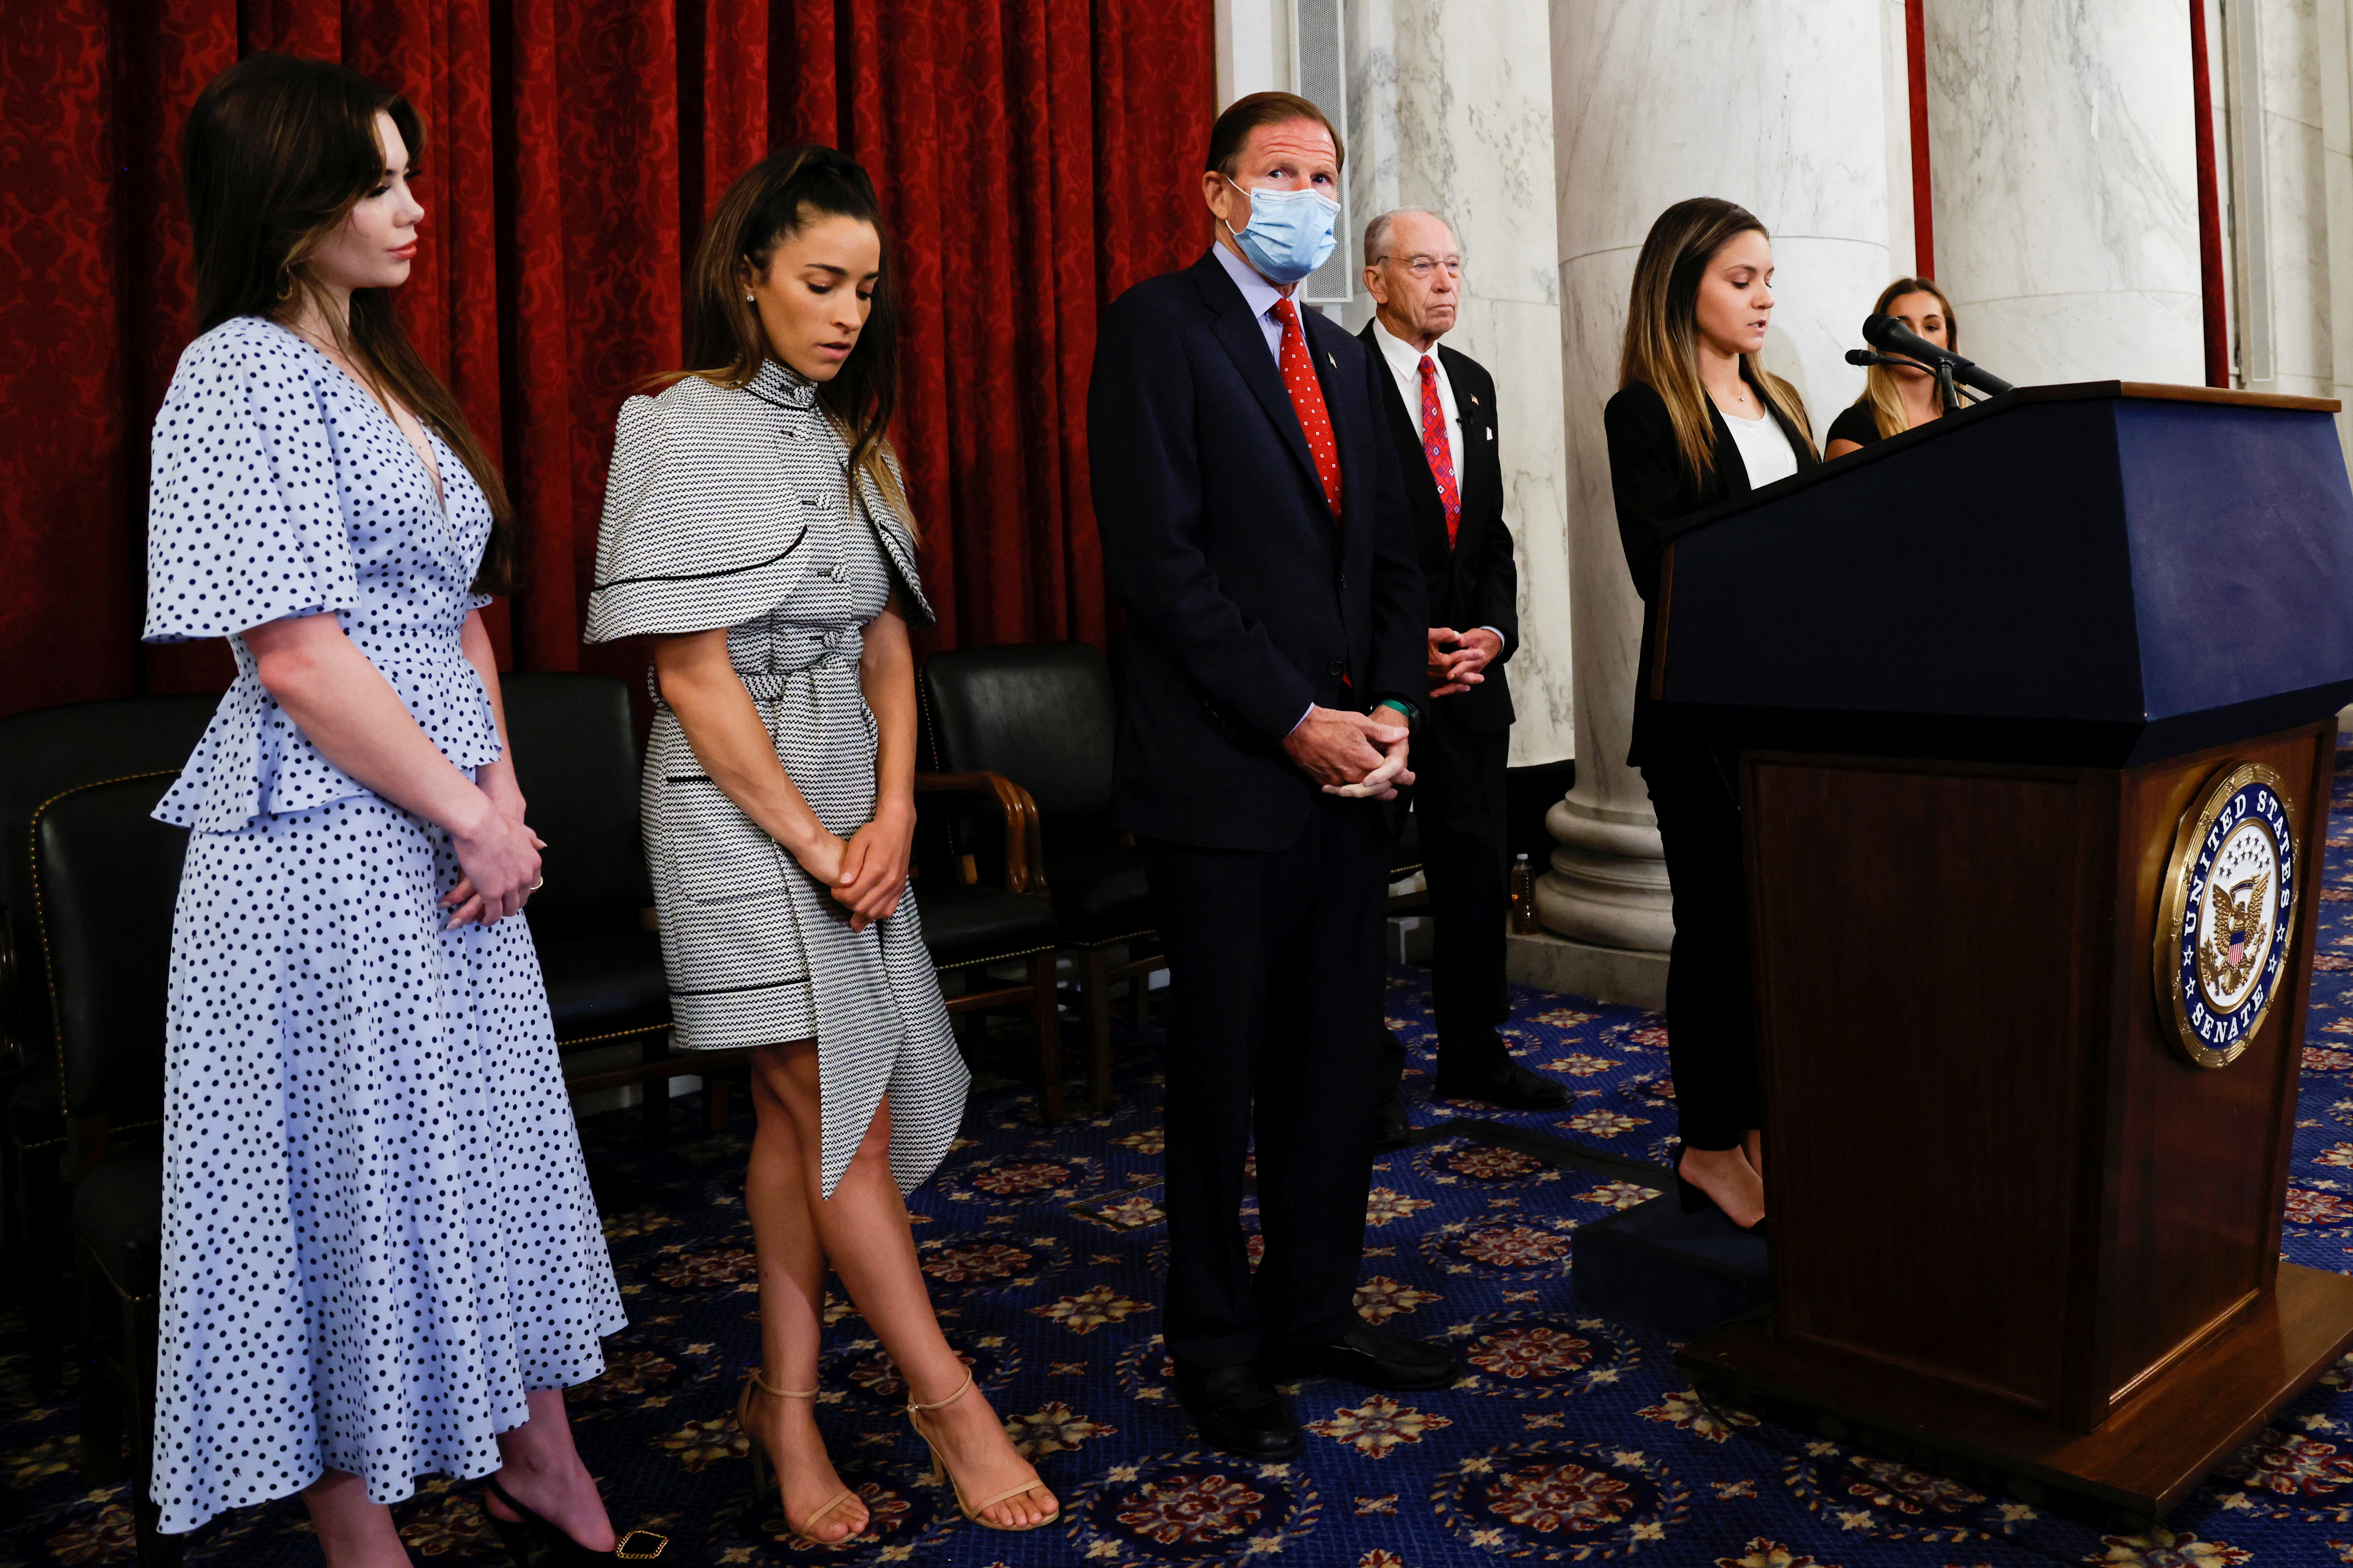 After their day of testimony before the Senate Judiciary Committee gymnasts Maroney, Raisman, Lorincz and Nichols participate in a news conference on Capitol Hill in Washington